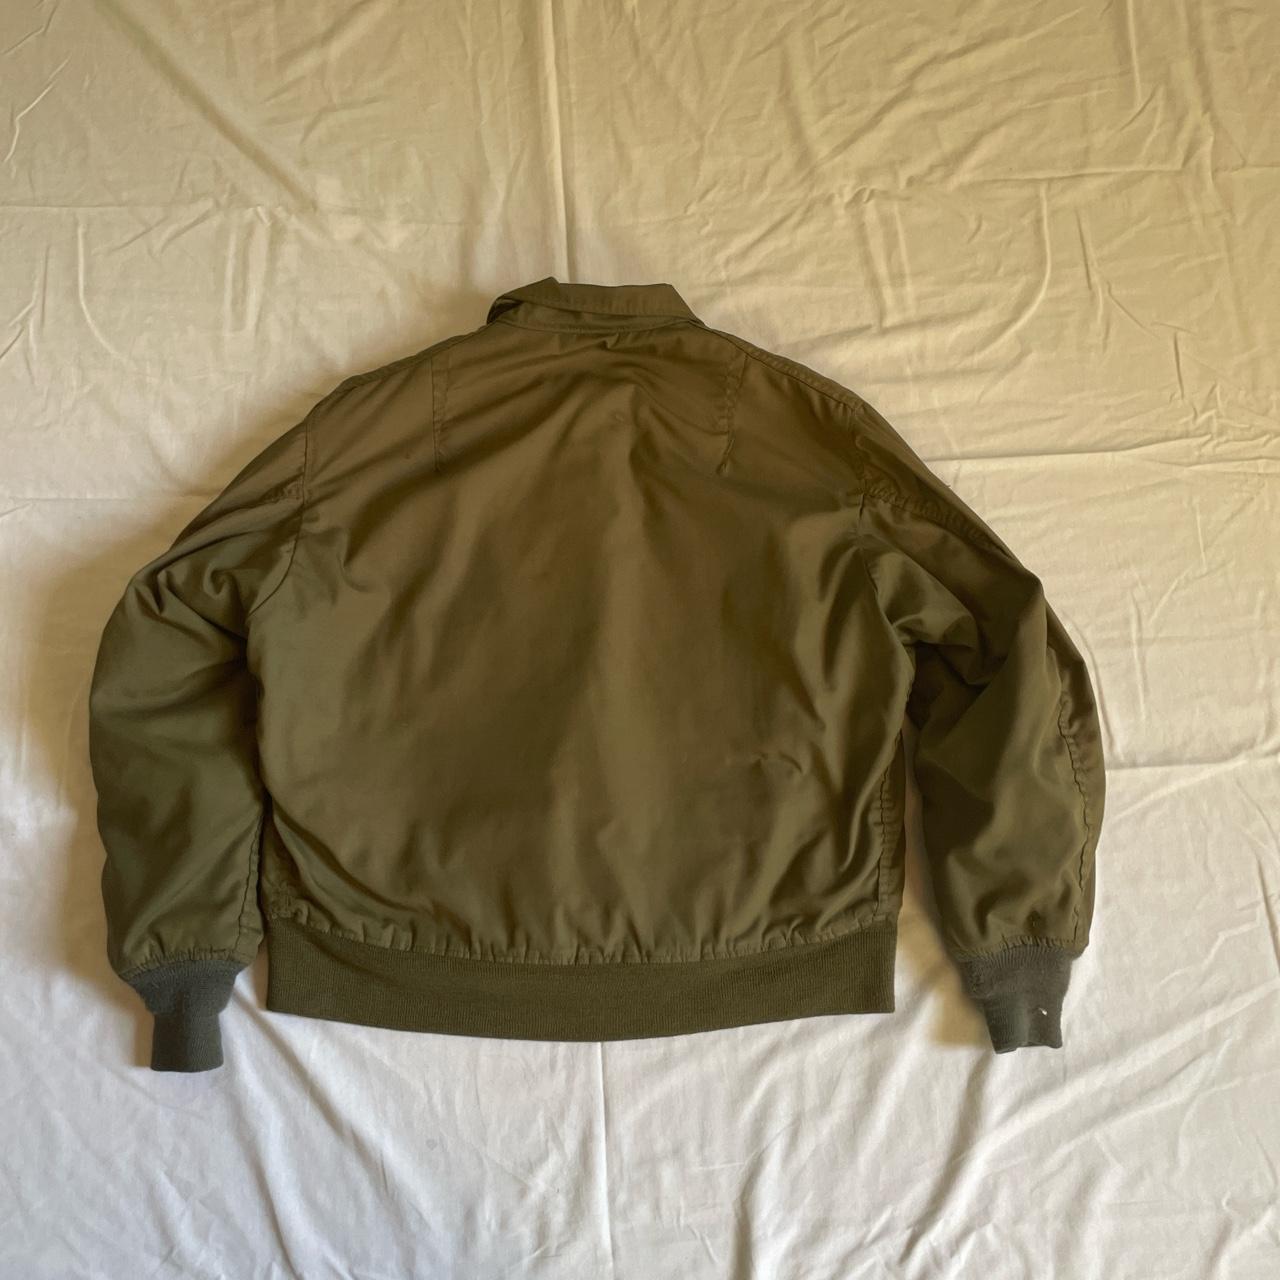 1980’s Military bomber jacket msg if you need... - Depop